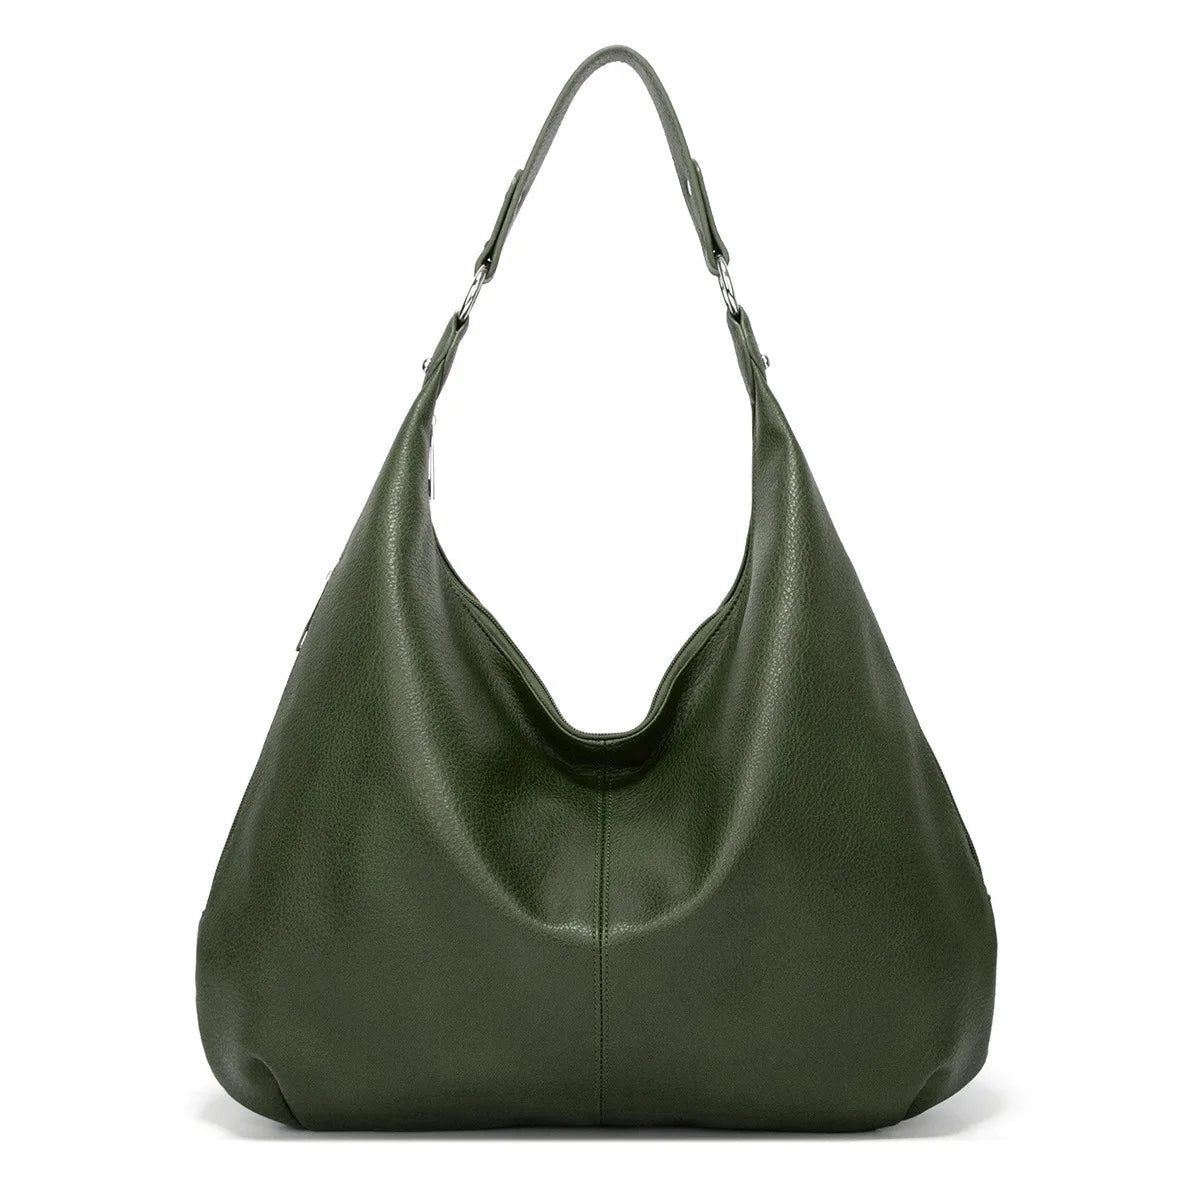 Black Leather Hobo Shoulder Bag The Store Bags E Green 